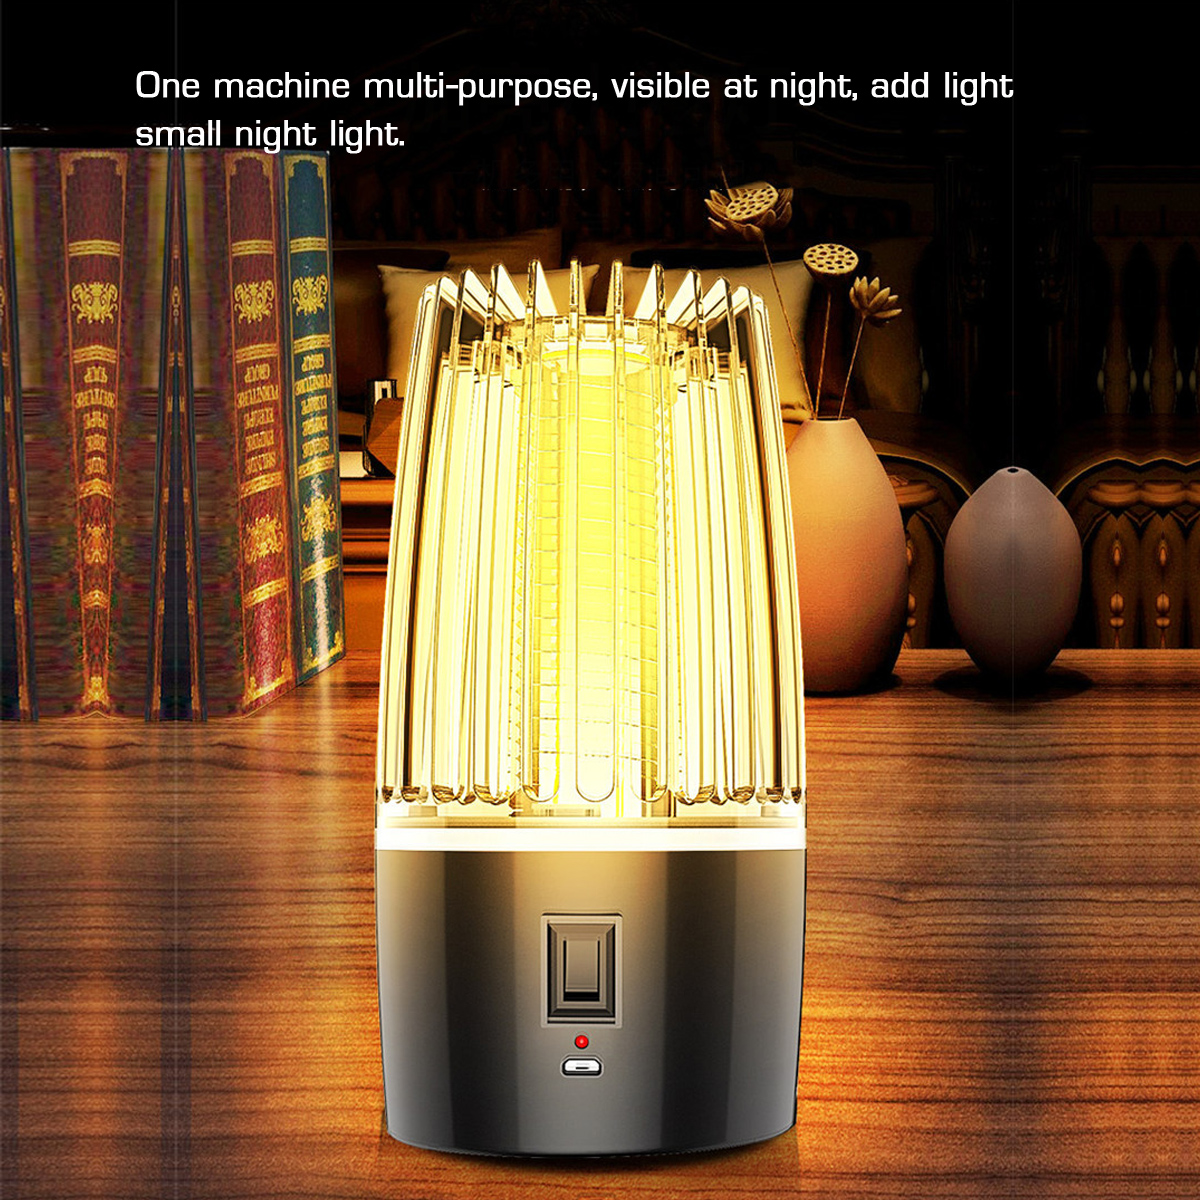 Rechargeable-5W-LED-Mosquito-Zapper-Killer-Fly-Insect-Bug-Trap-Lamp-Night-Light-DC5V-1668033-4